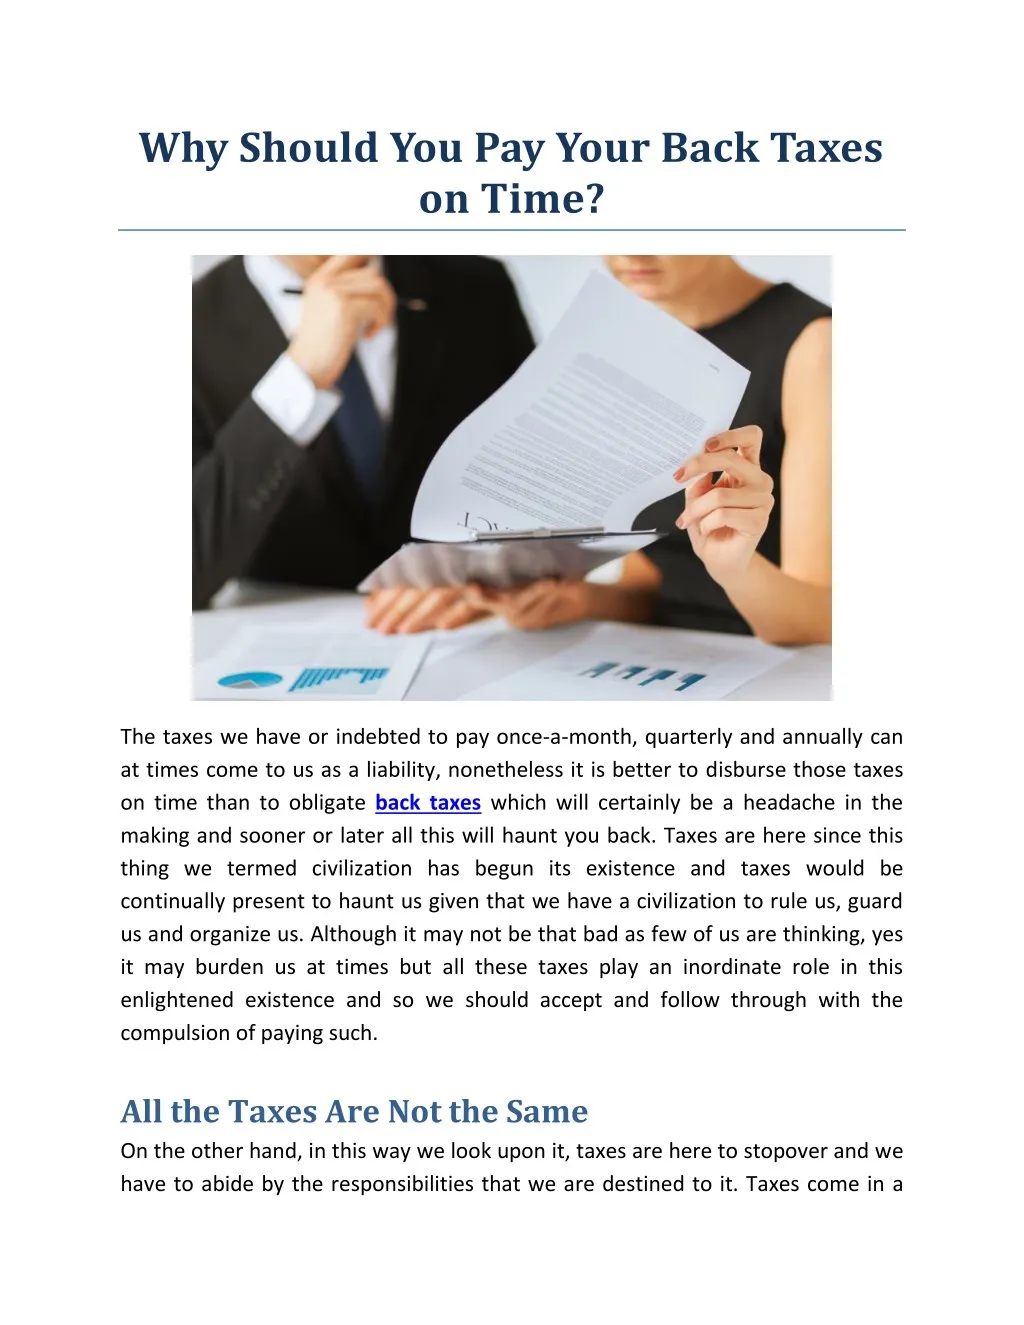 why should you pay your back taxes on time